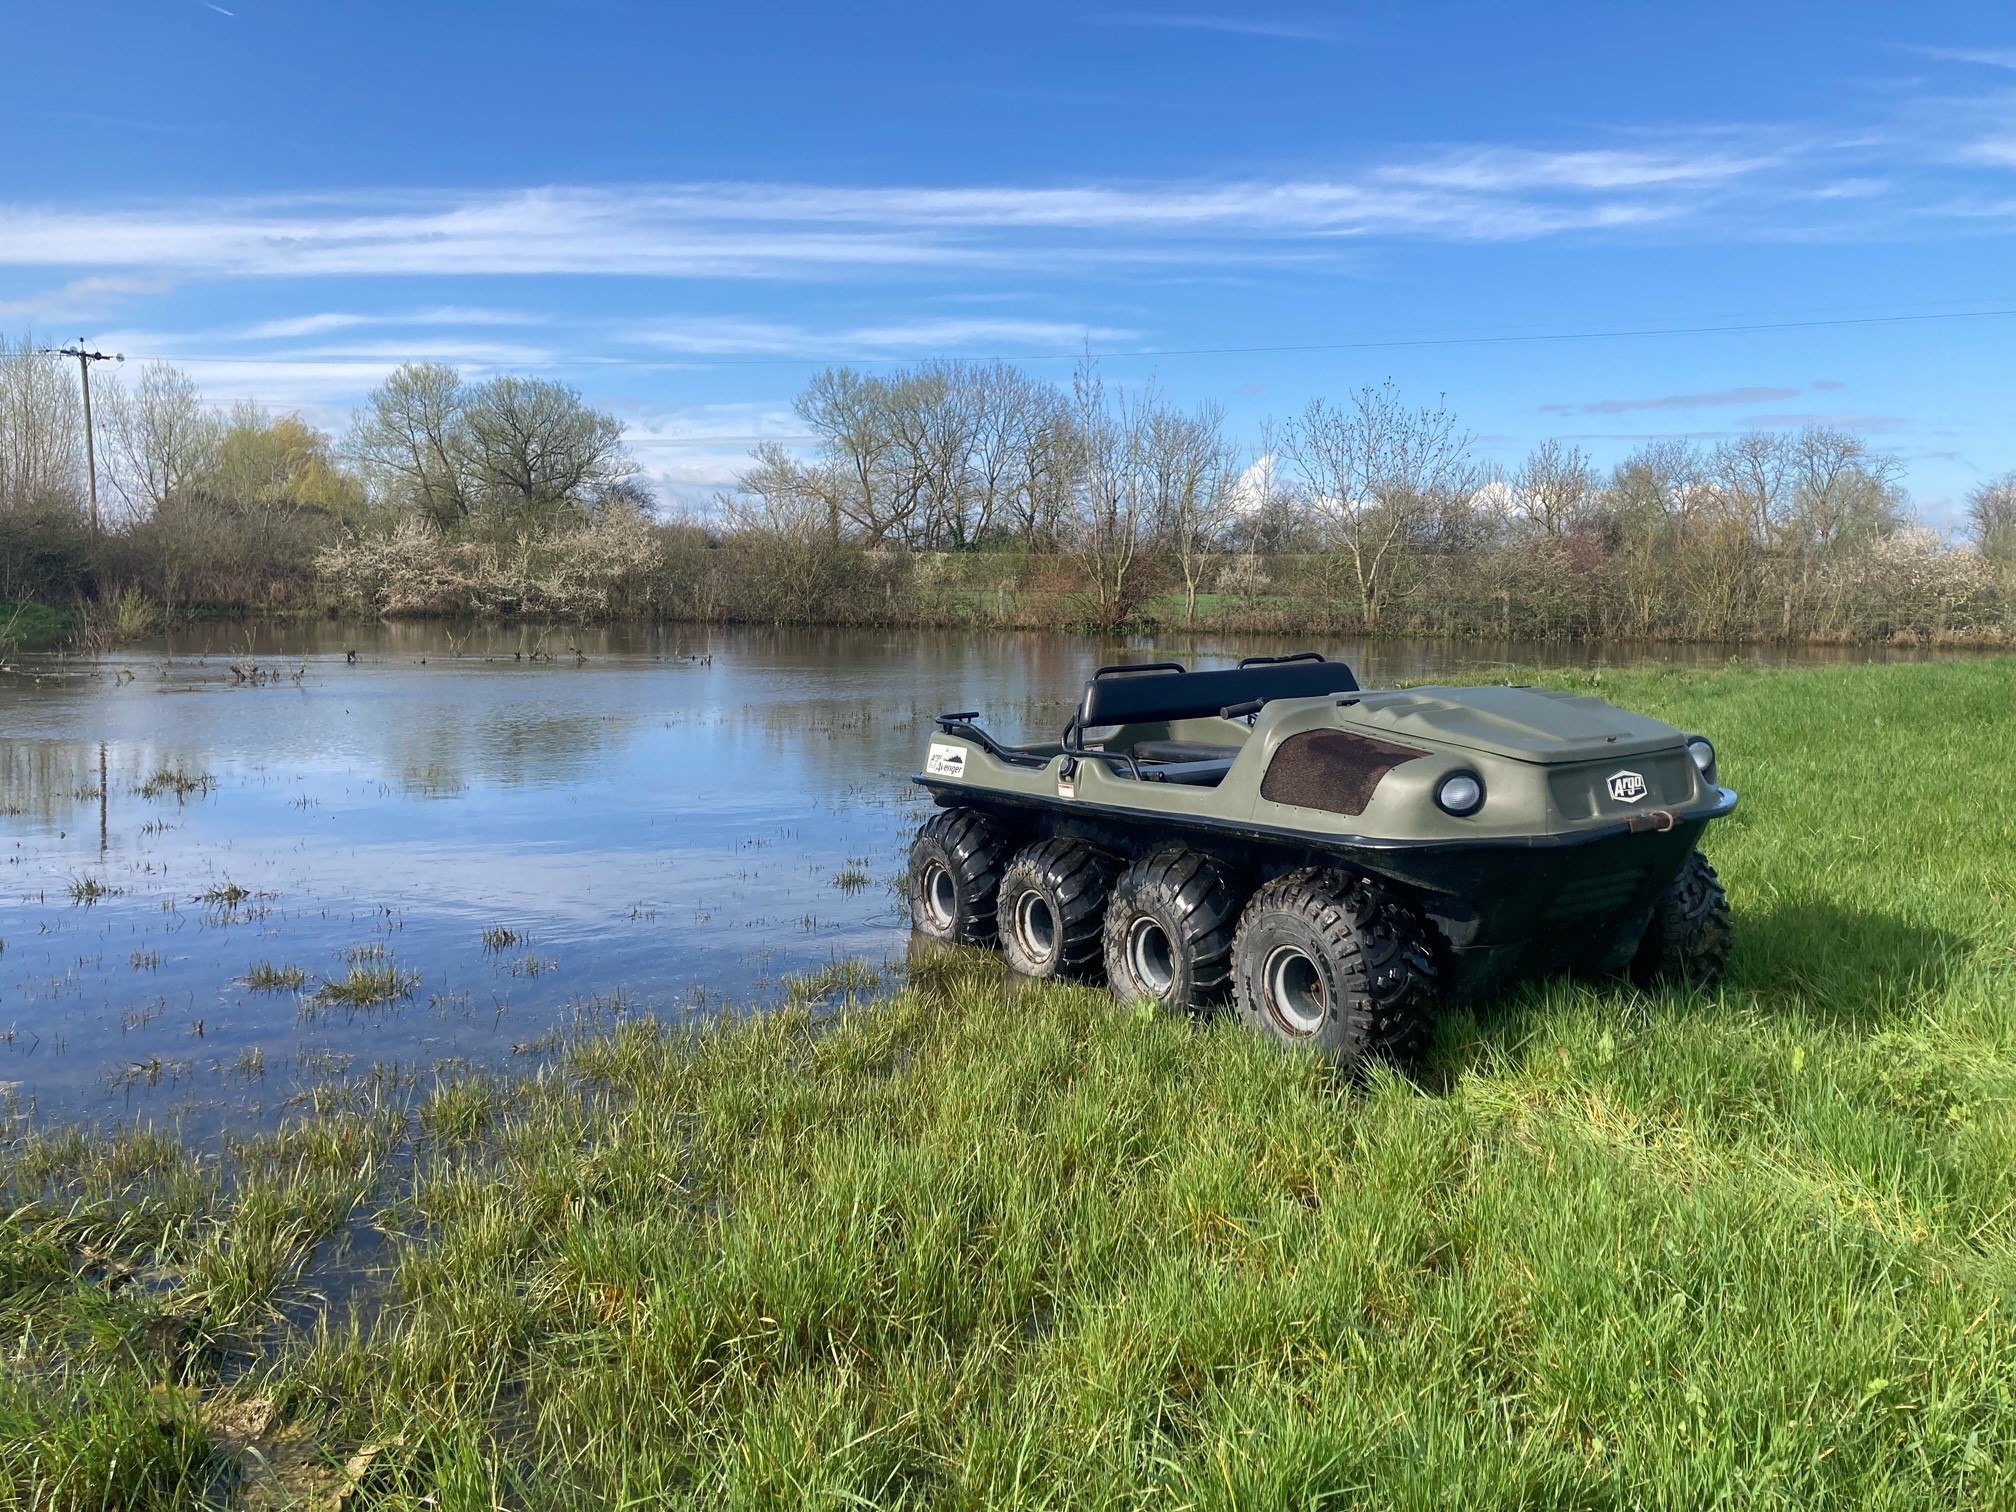 A 2005 Argo Avenger 8x8 Amphibious all-terrain vehicle, which was purchased new by Jeremy Clarkson, will be sold at the Cheffins Cambridge Vintage Sale. (Cheffins/ PA)